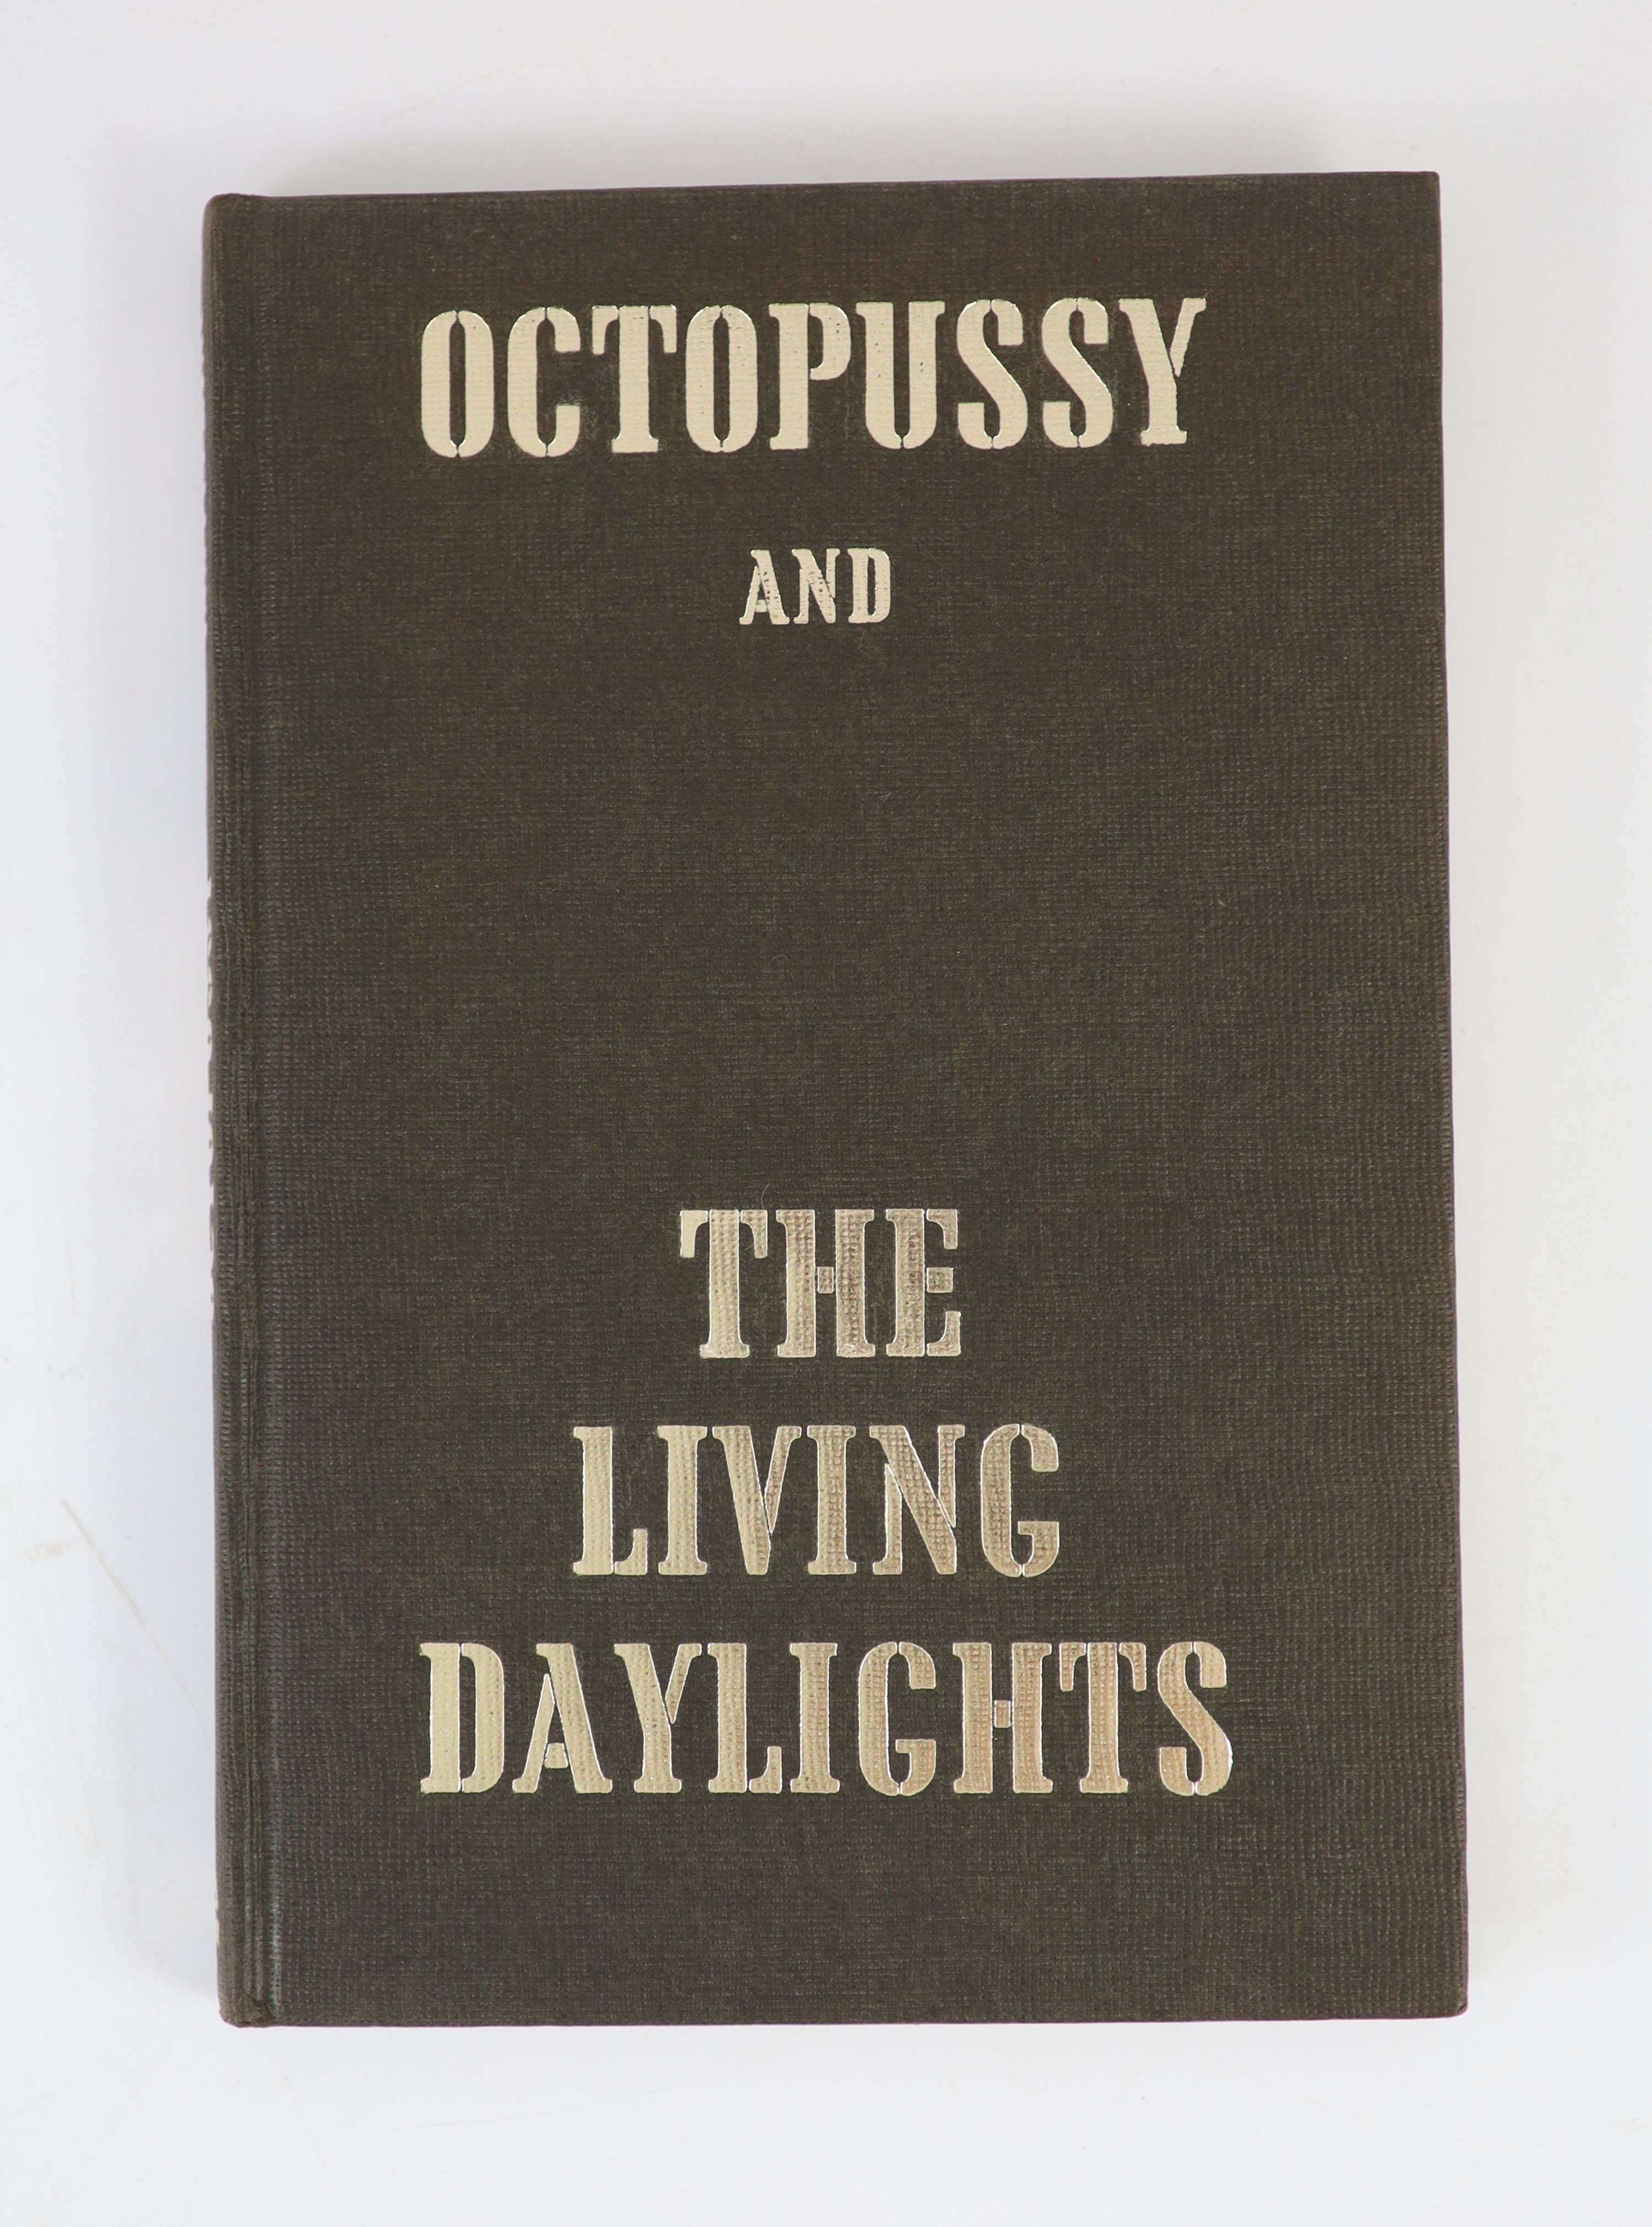 Fleming, Ian - Octopussy and The Living Daylights, 1st edition, 8vo, black cloth with stamped silver lettering, with unclipped d/j, Jonathan Cape, London, 1966